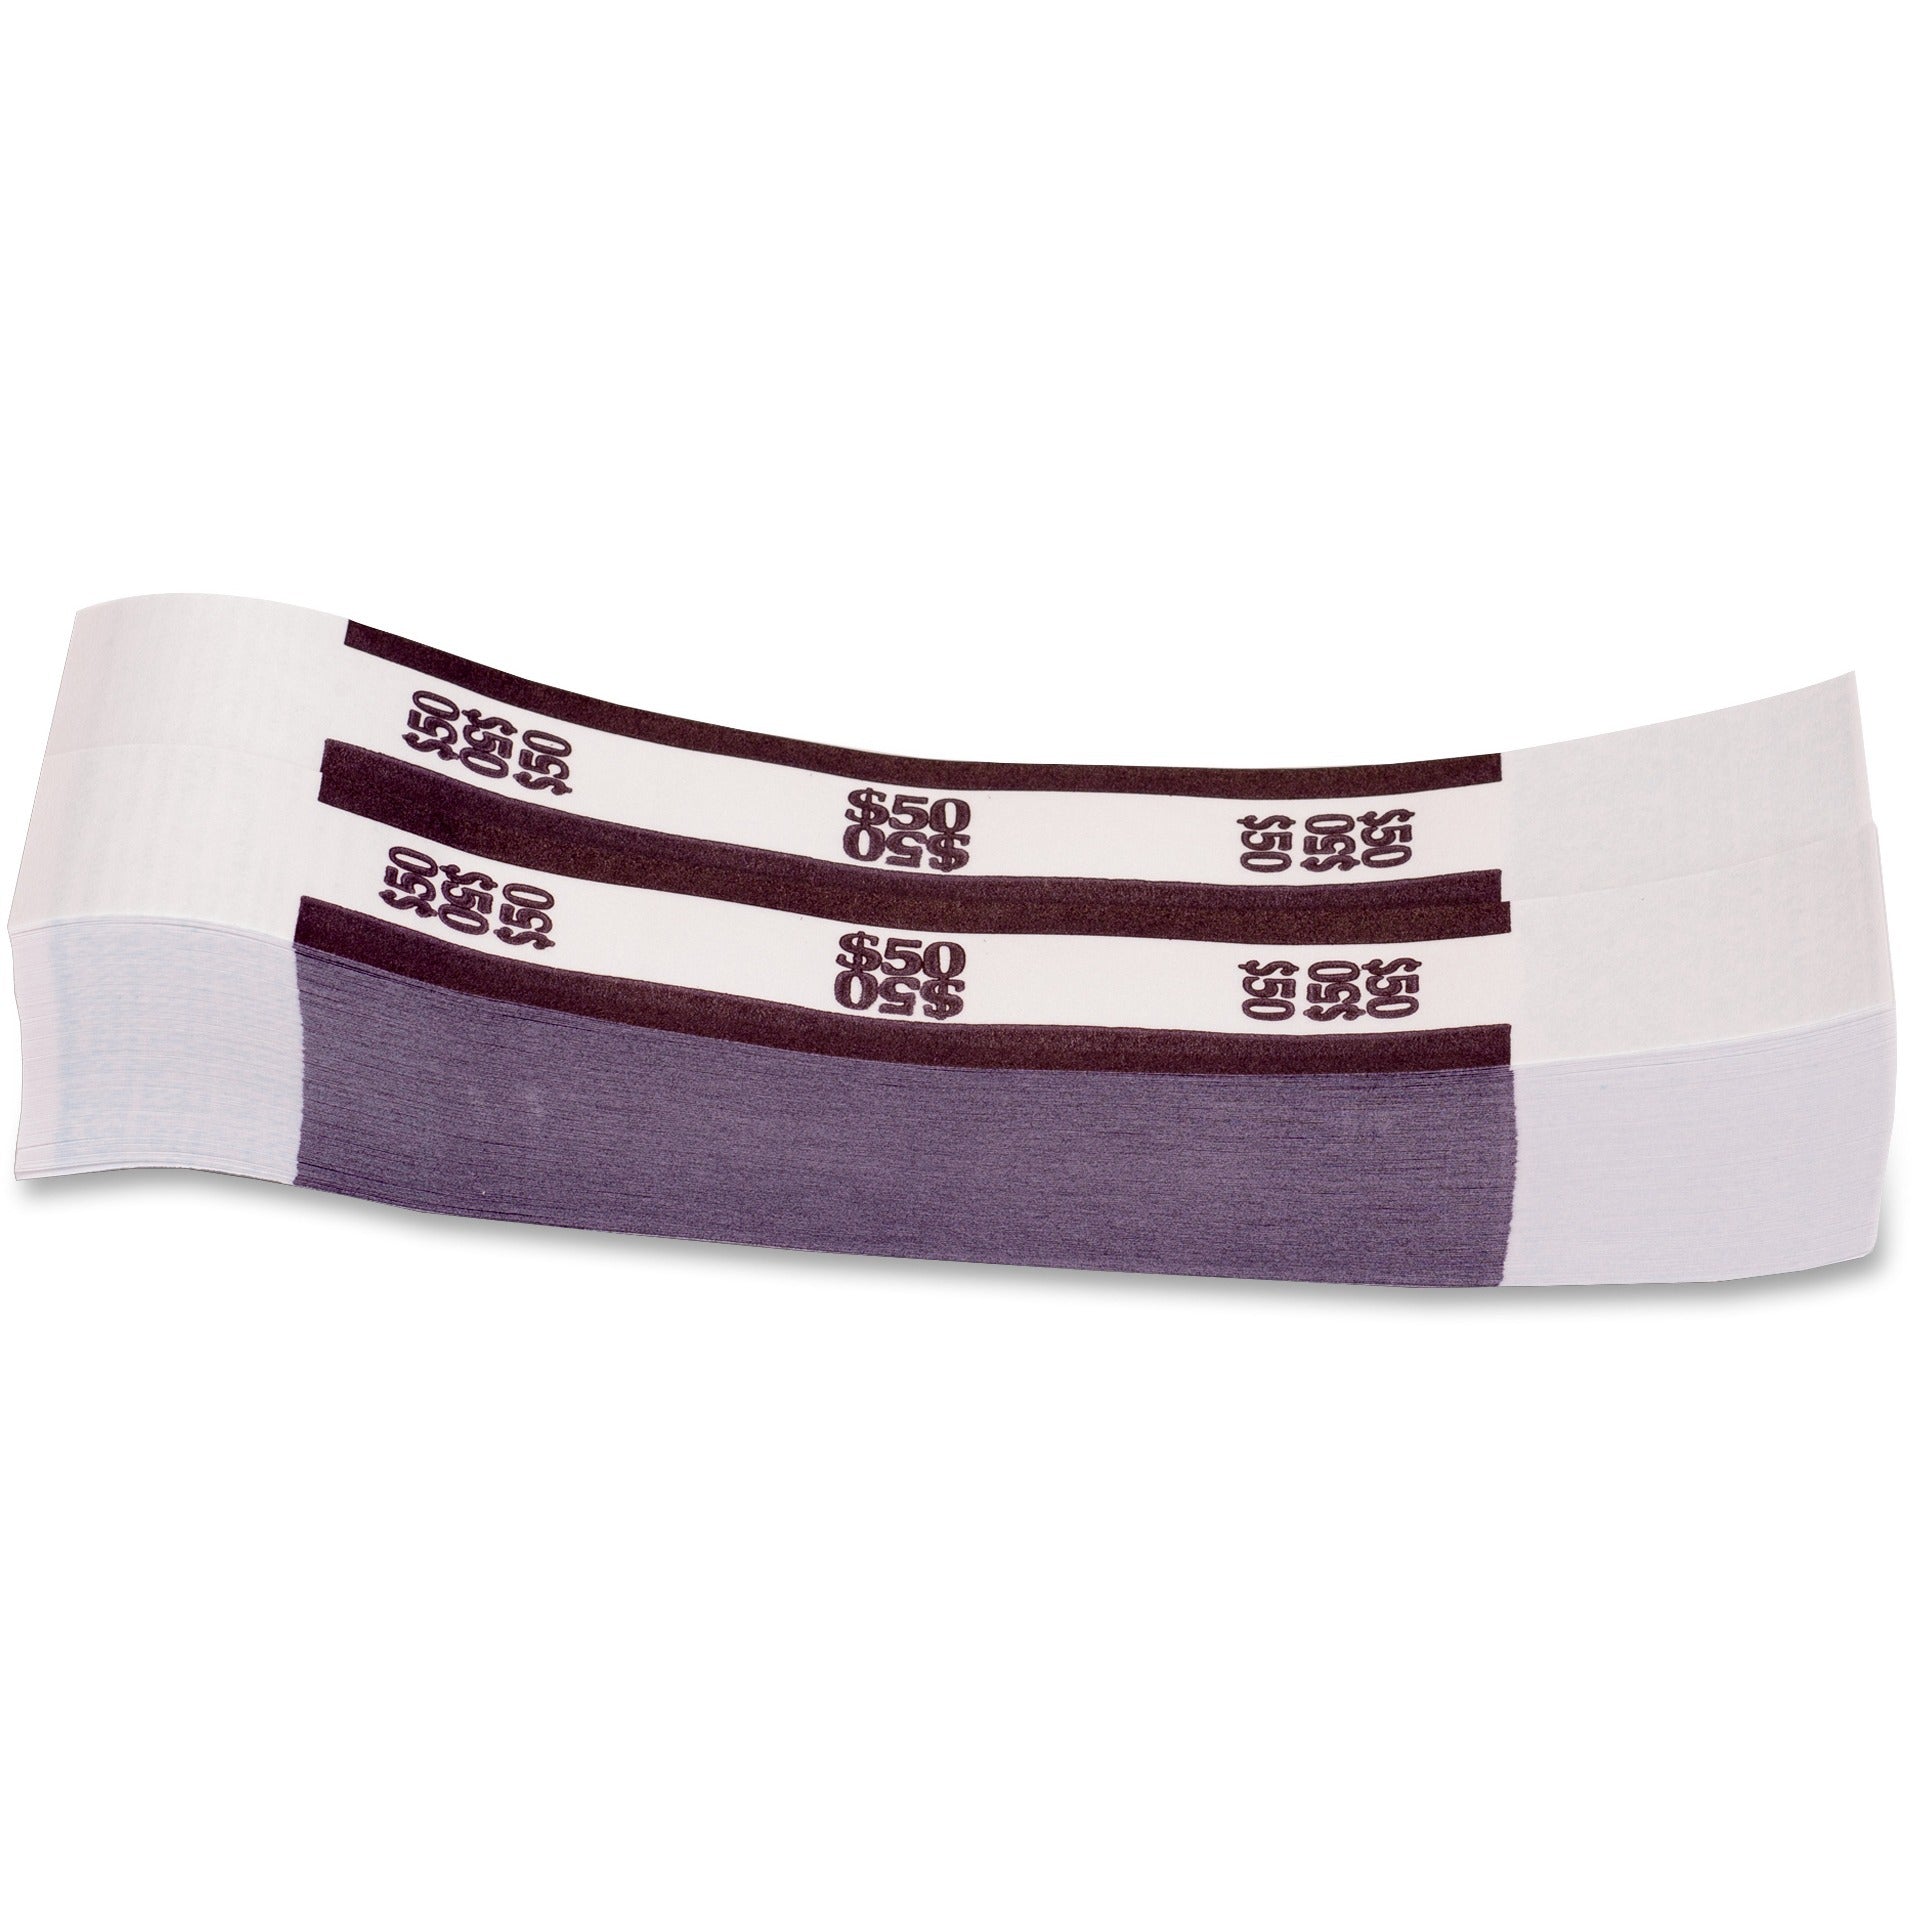 pap-r-currency-straps-125-width-self-sealing-self-adhesive-durable-20-lb-basis-weight-kraft-white-violet-1000-pack_pqp400075 - 2